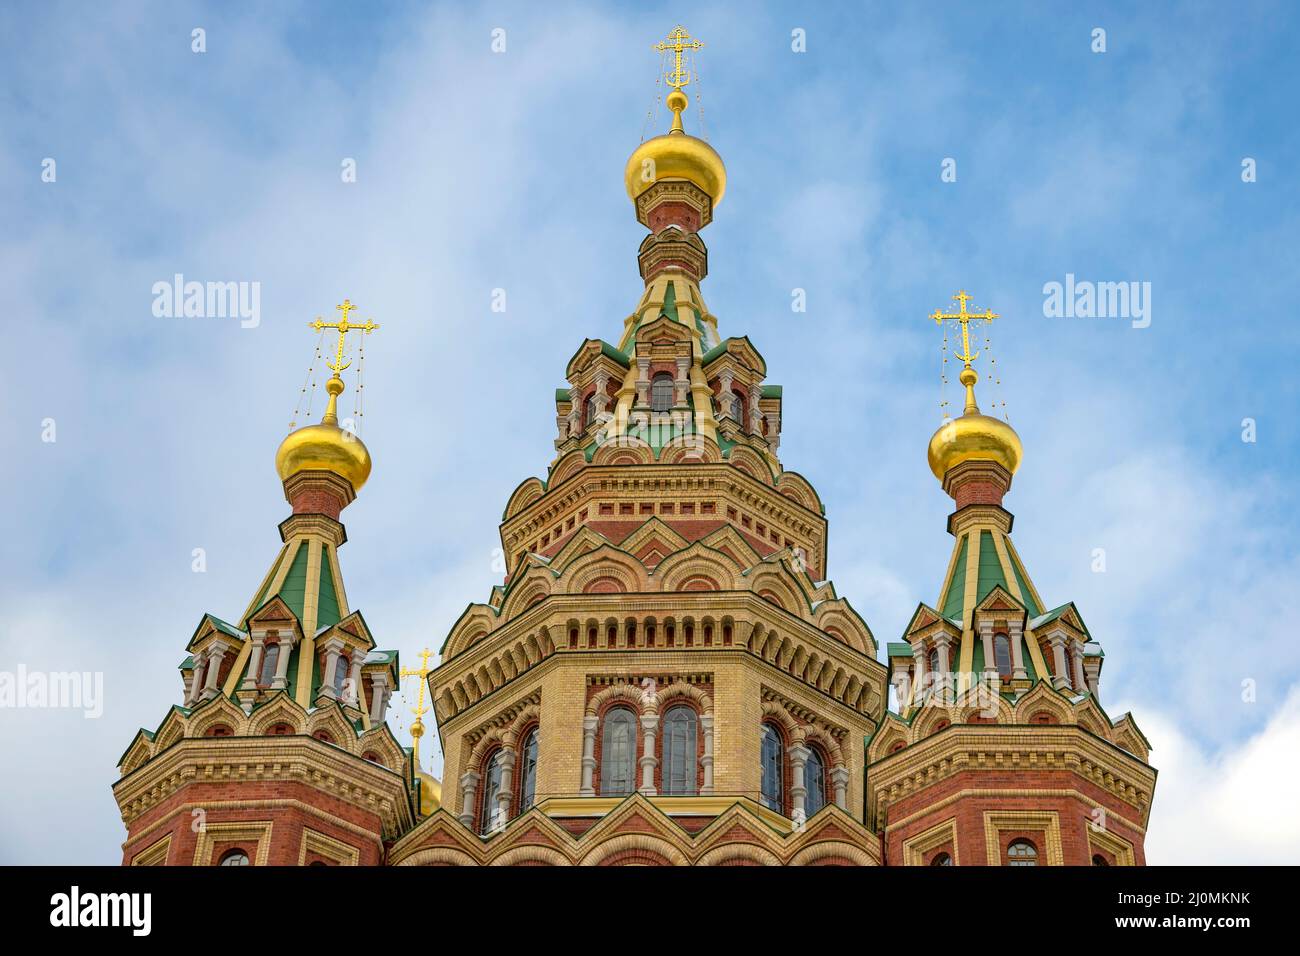 Fragment of an ancient Cathedral of the Holy Apostles Peter and Paul. Peterhof, Russia Stock Photo